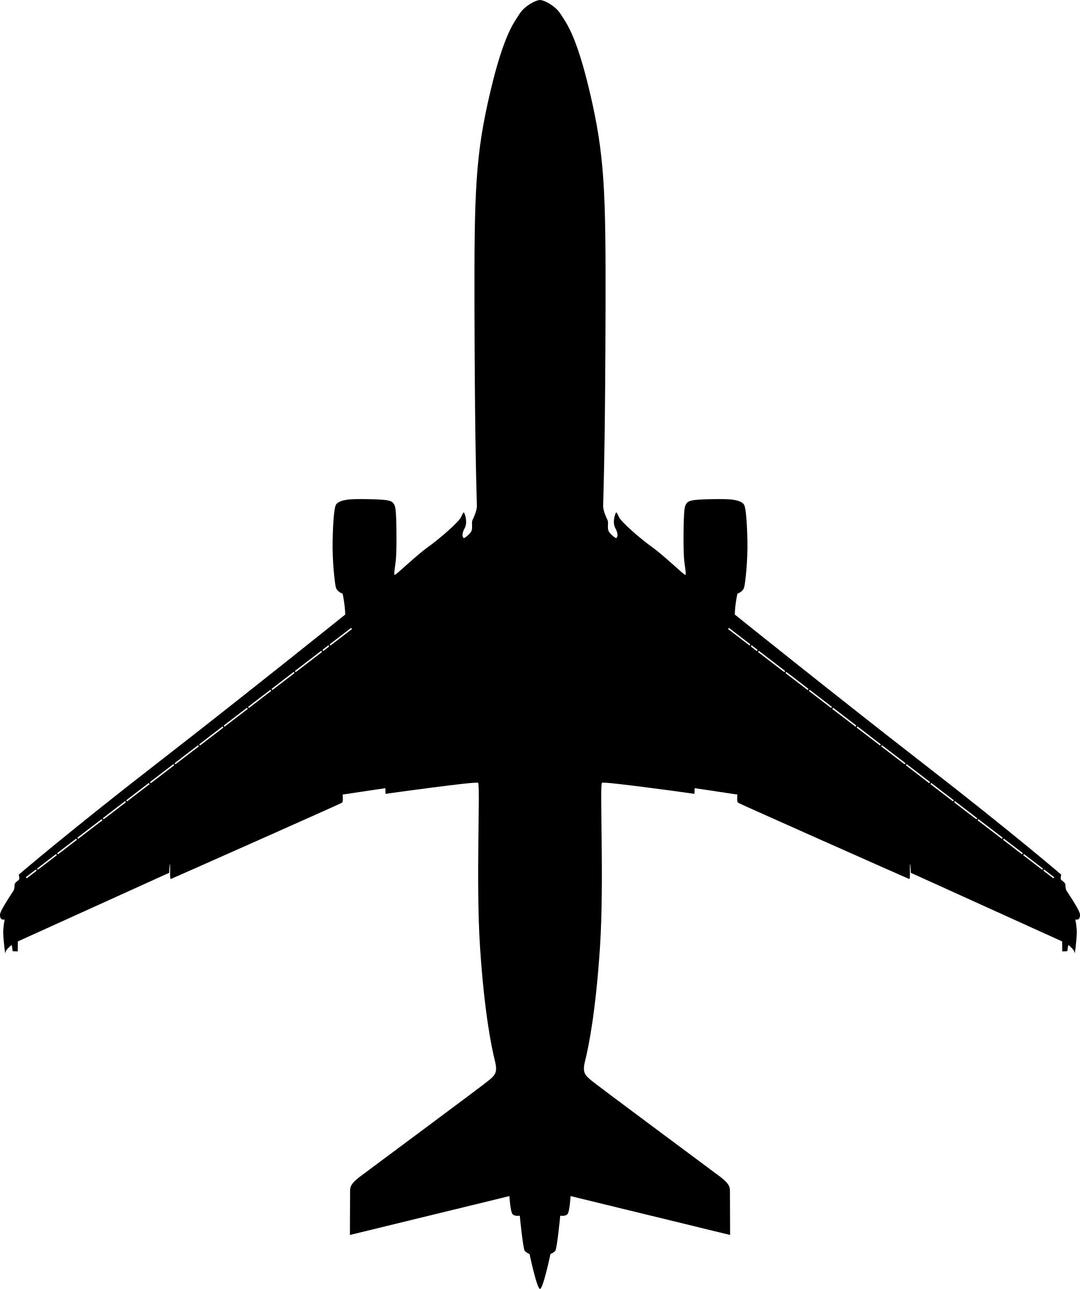 Boeing 737 outline silhouette png transparent